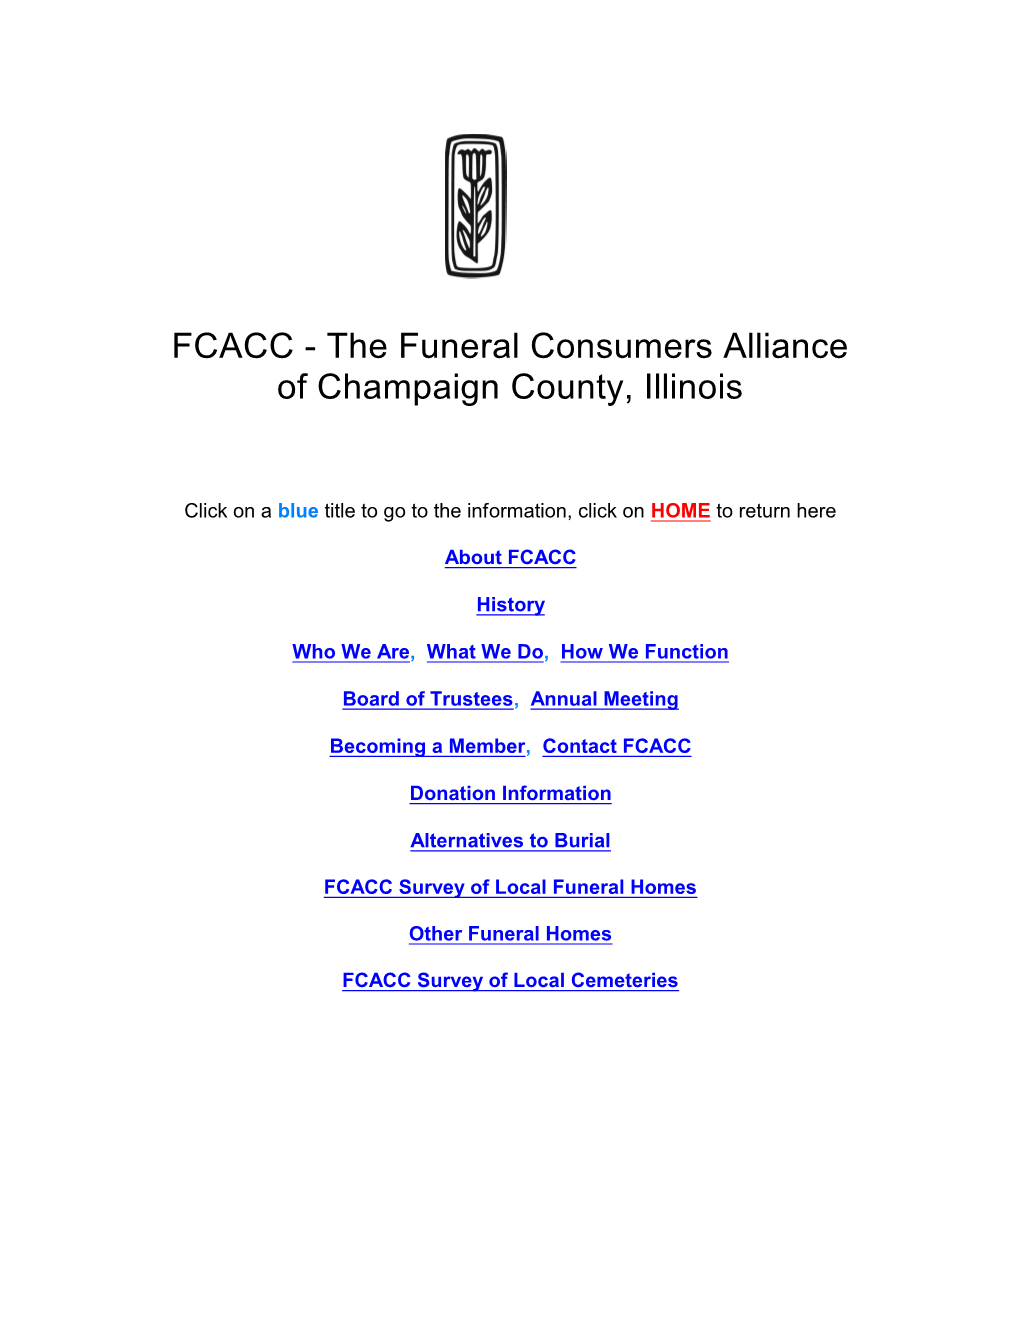 FCACC - the Funeral Consumers Alliance of Champaign County, Illinois